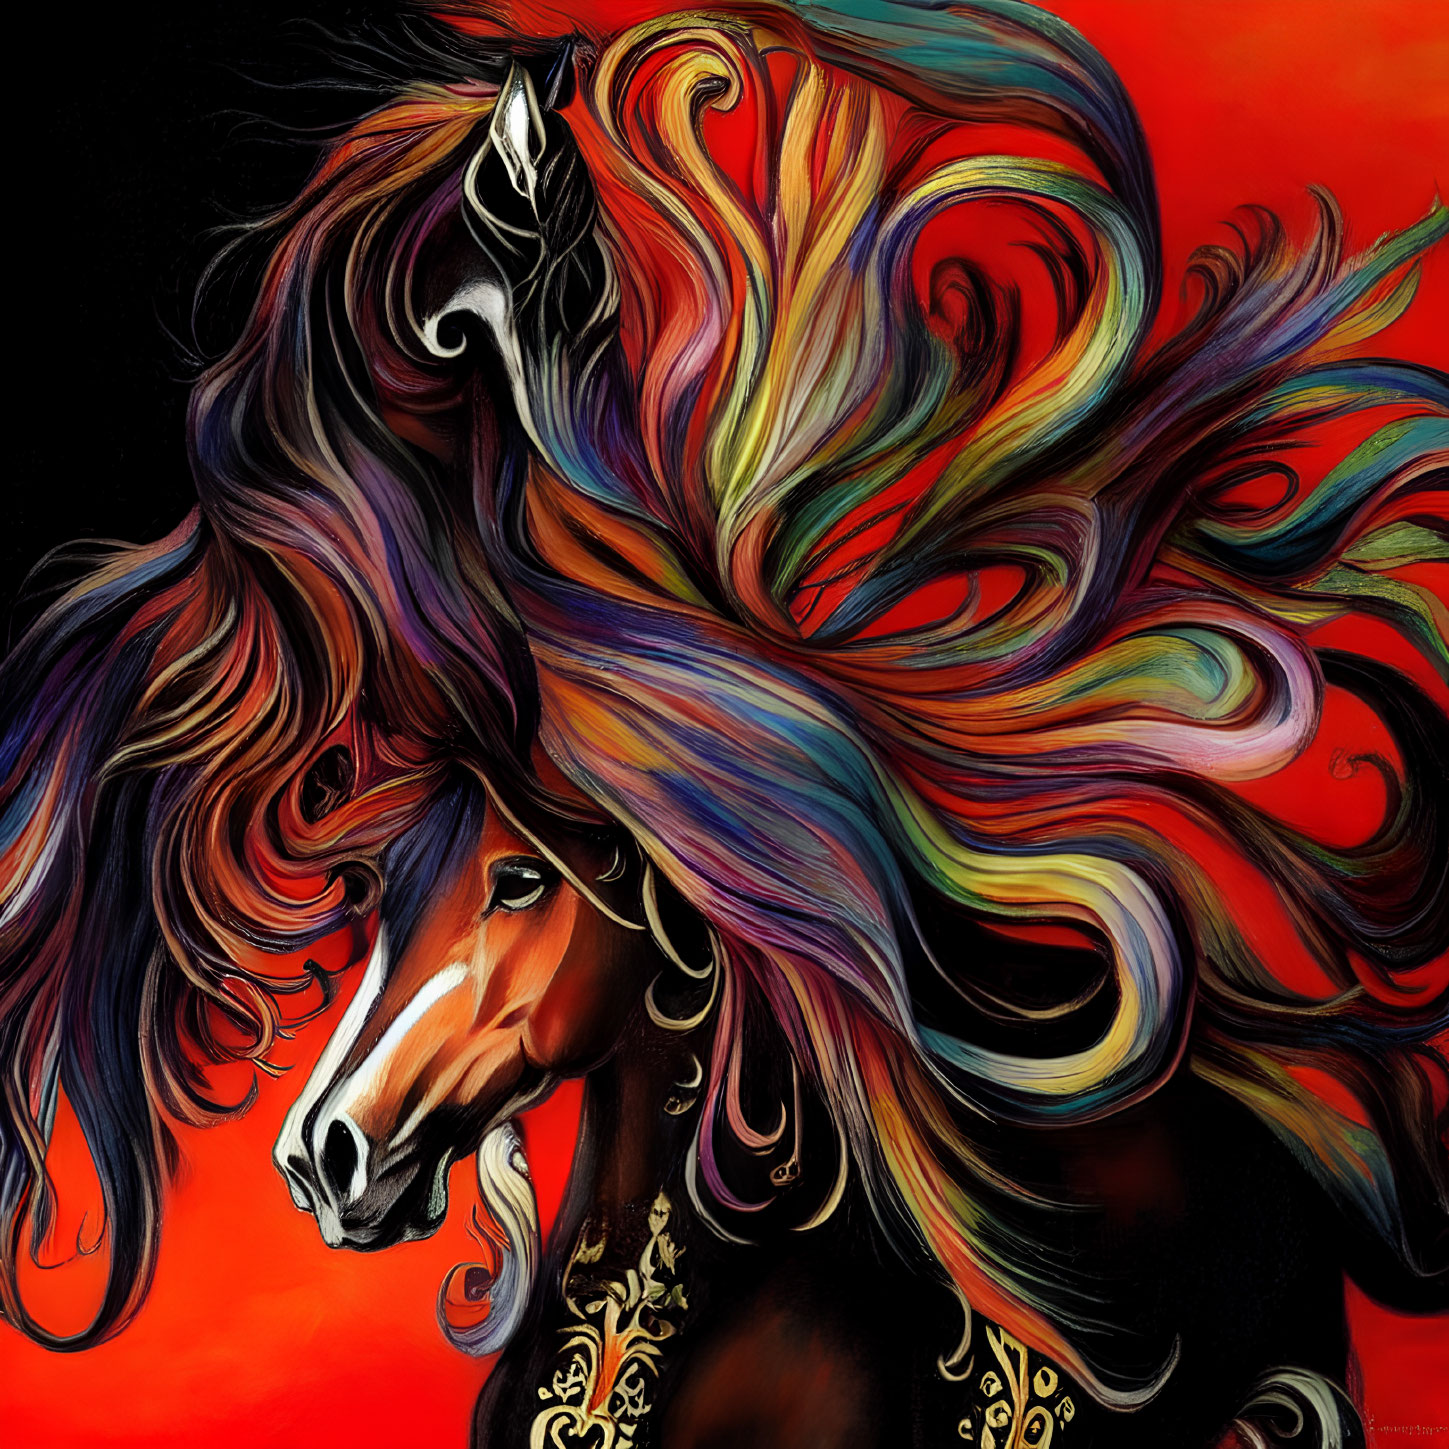 Colorful horse illustration with flowing mane on red background